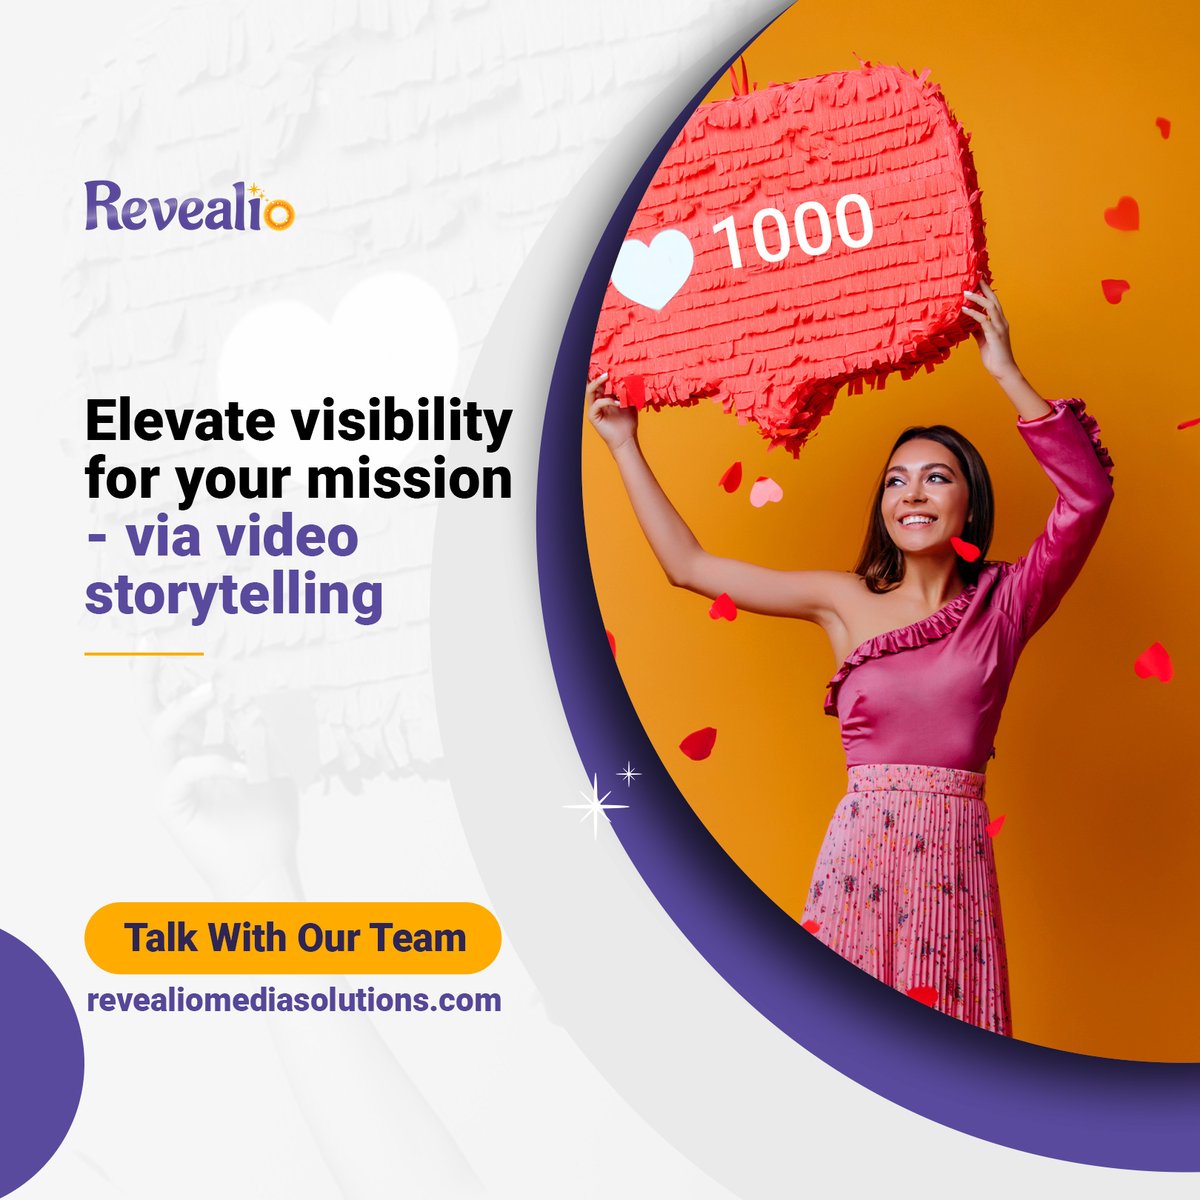 Elevate visibility for your mission with REVEALiO’s captivating short videos!

Talk with our team to get more info.

#video #story #videostorytelling #smallbusinessvideo #nonprofitvideo #purposedriven #innovativestorytelling #revealio #storytelling #shortformvideo